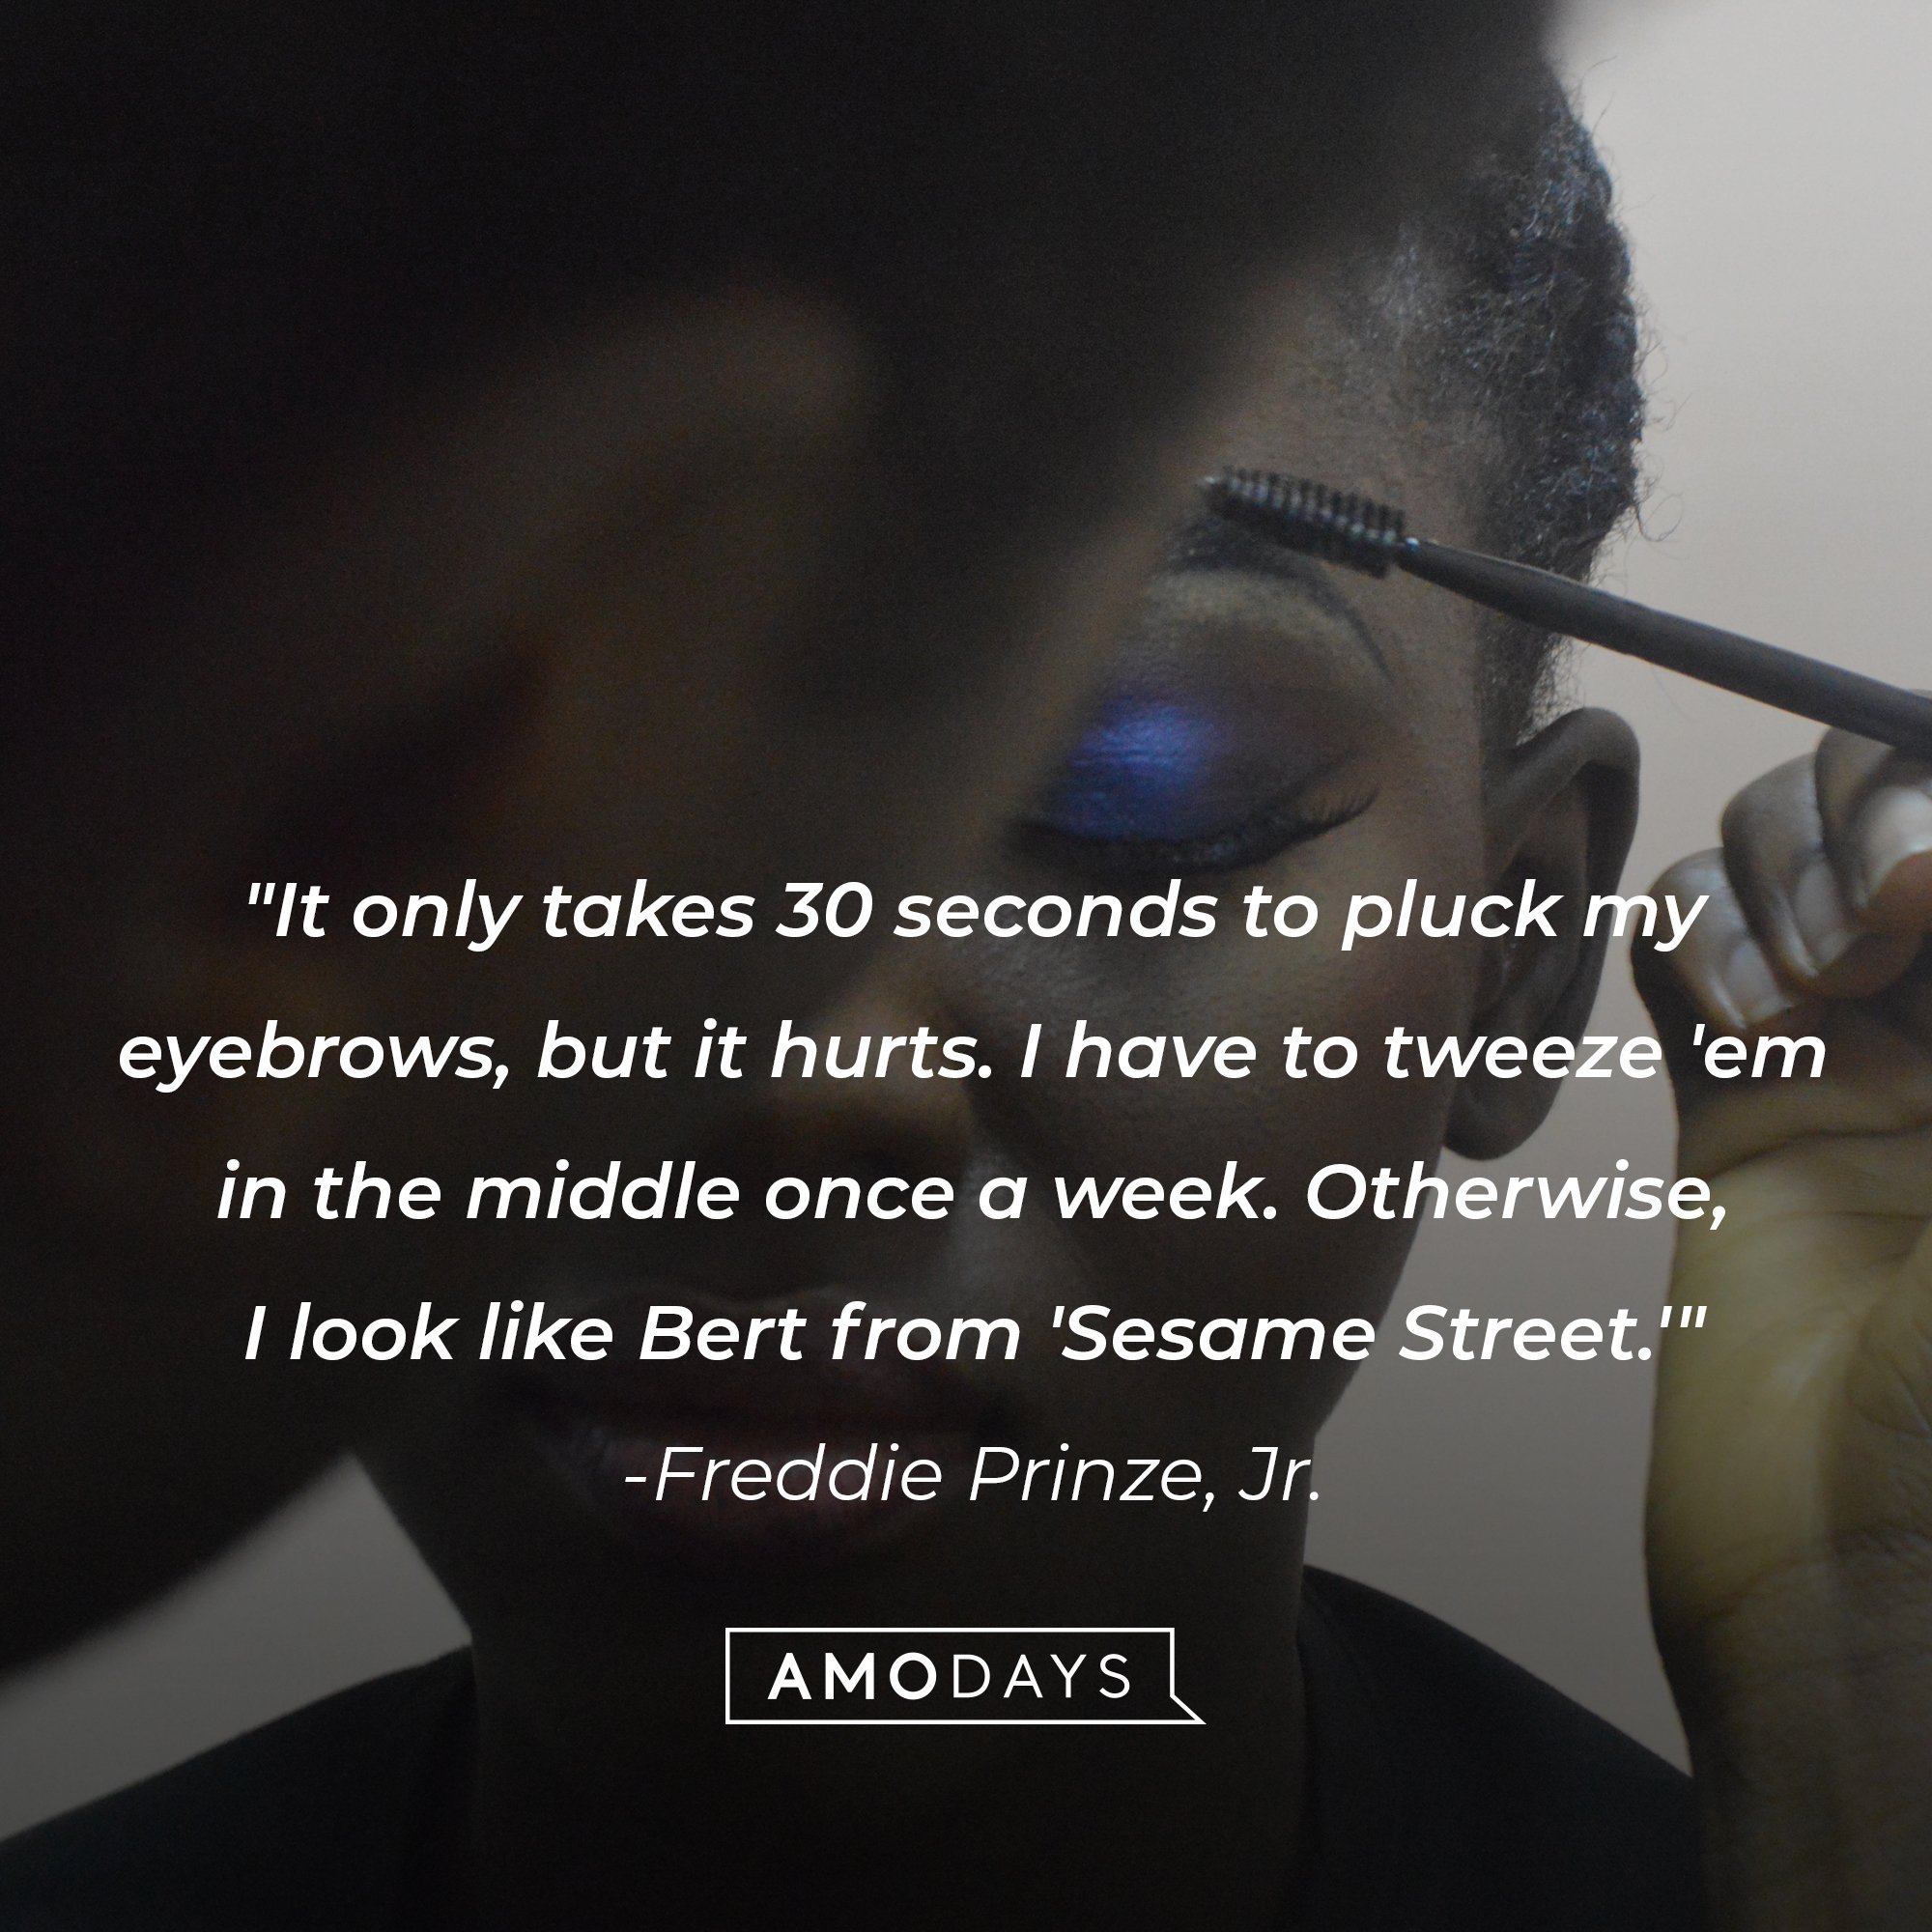 Freddie Prinze Jr.’s quote: "It only takes 30 seconds to pluck my eyebrows, but it hurts. I have to tweeze 'em in the middle once a week. Otherwise, I look like Bert from 'Sesame Street.'"| Image: AmoDays